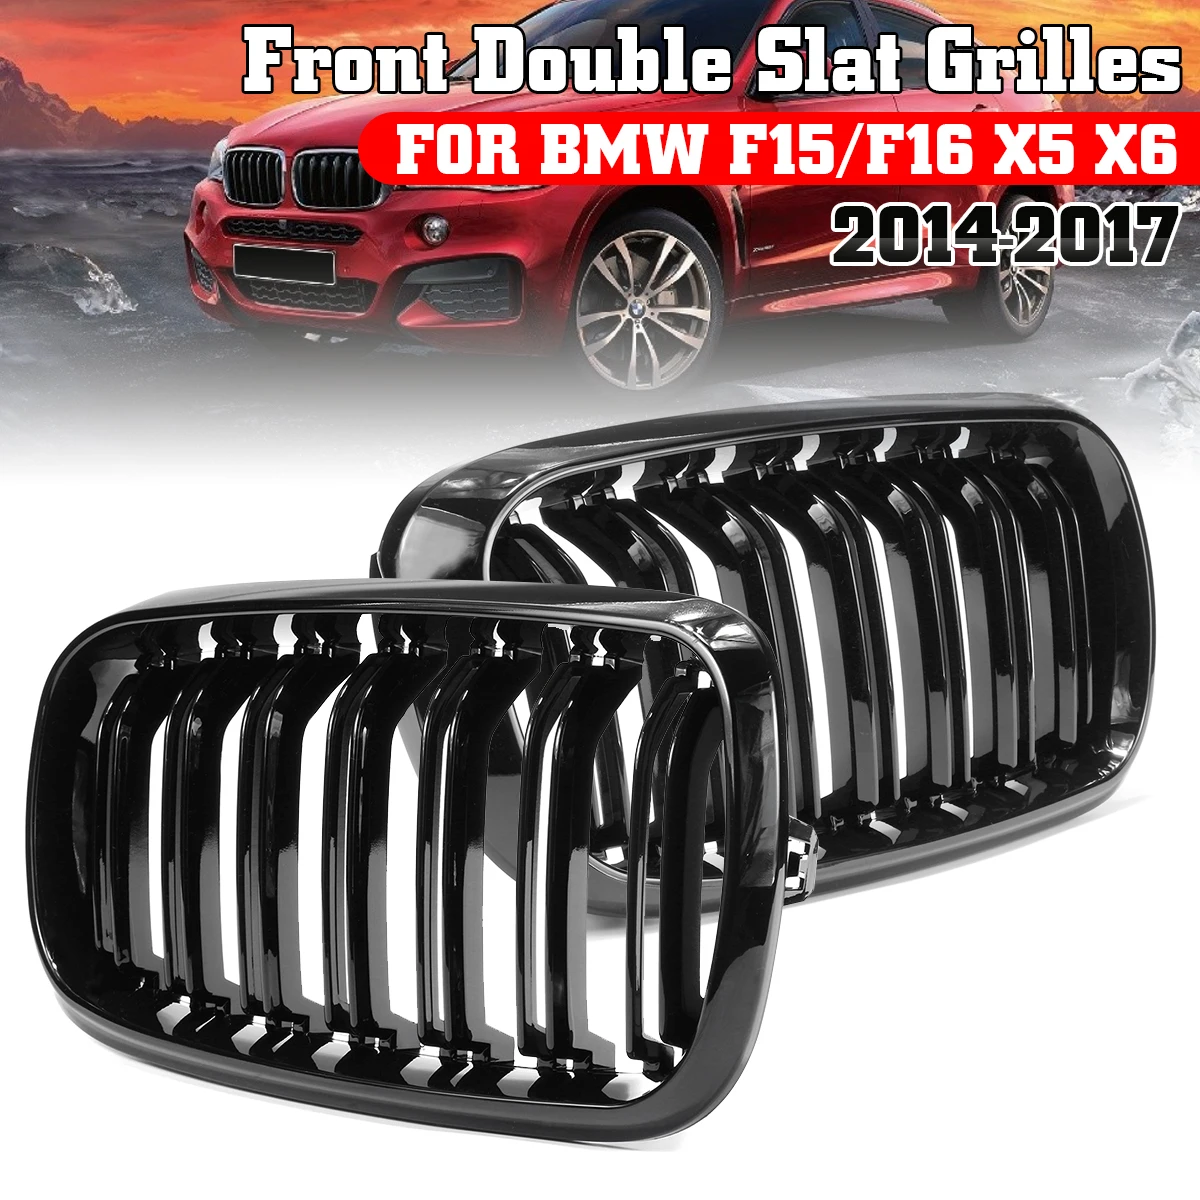 2Pcs Gloss/ Black Car 2 Slat Line Kidney Grille for BMW F15 F16 X5 X6 2014 2015 2016 2017 Car Styling Front Bumper Racing Grille